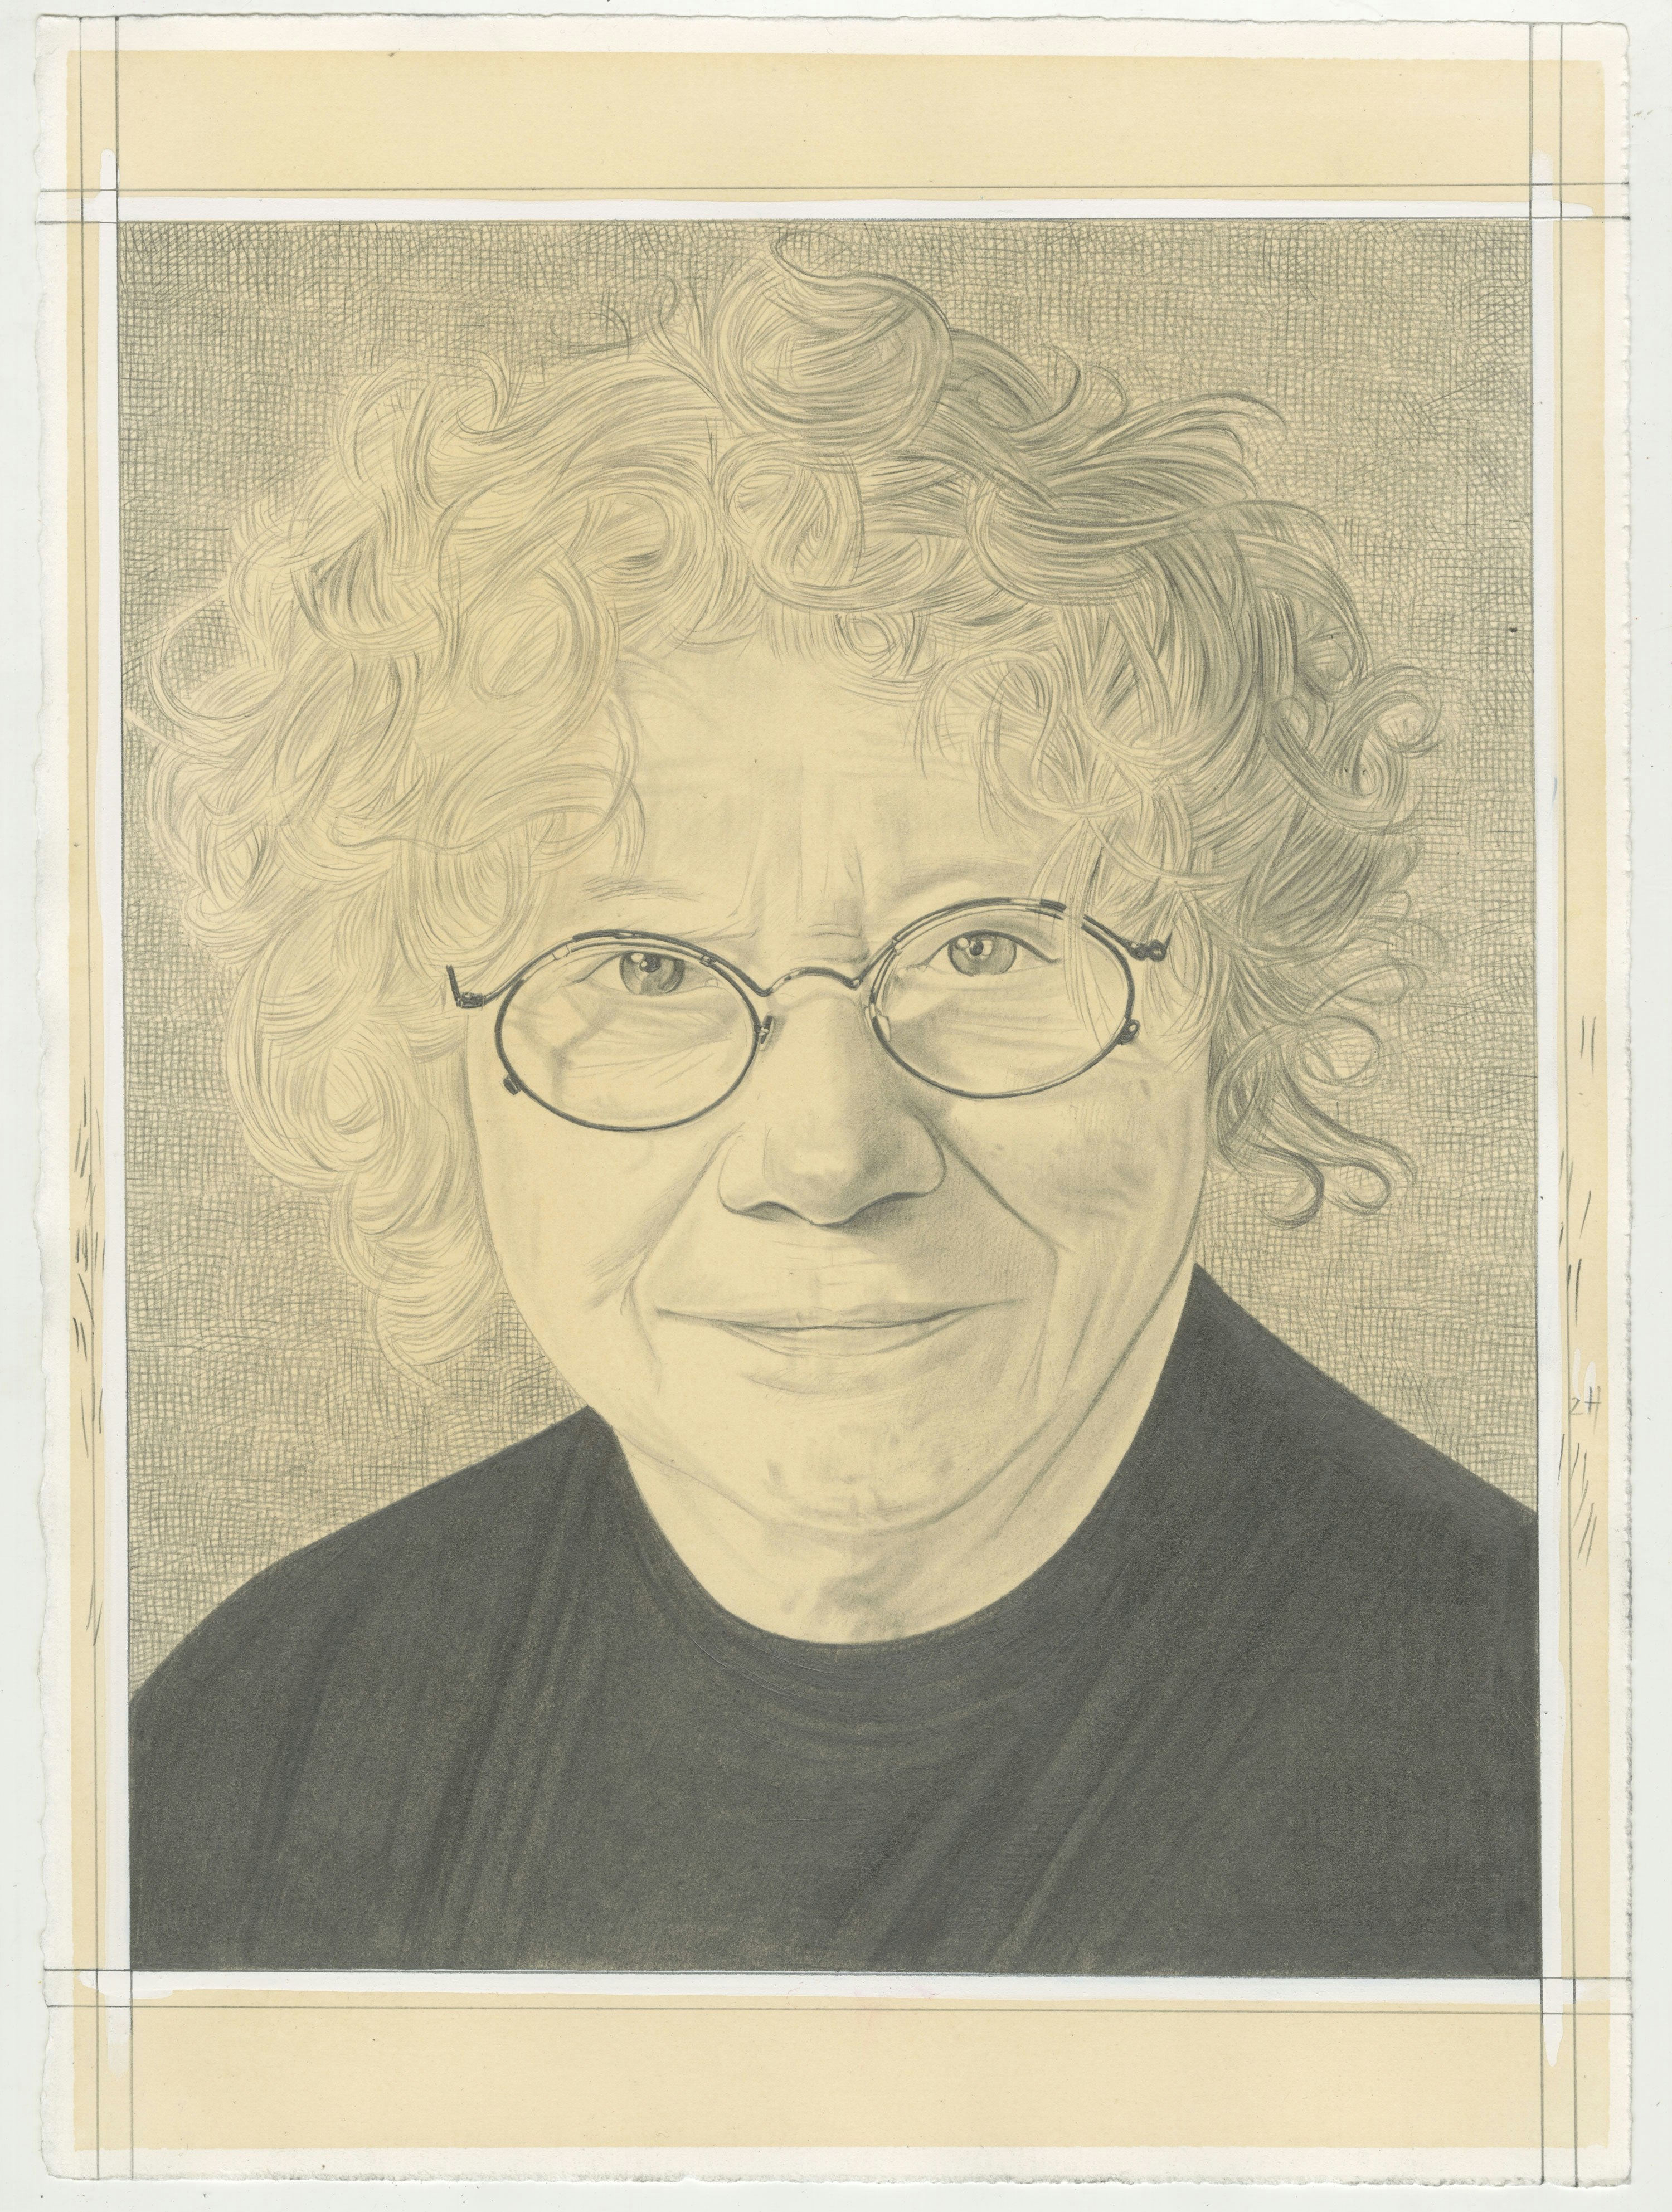 Portrait of Gladys Nilsson, pencil on paper by Phong H. Bui.